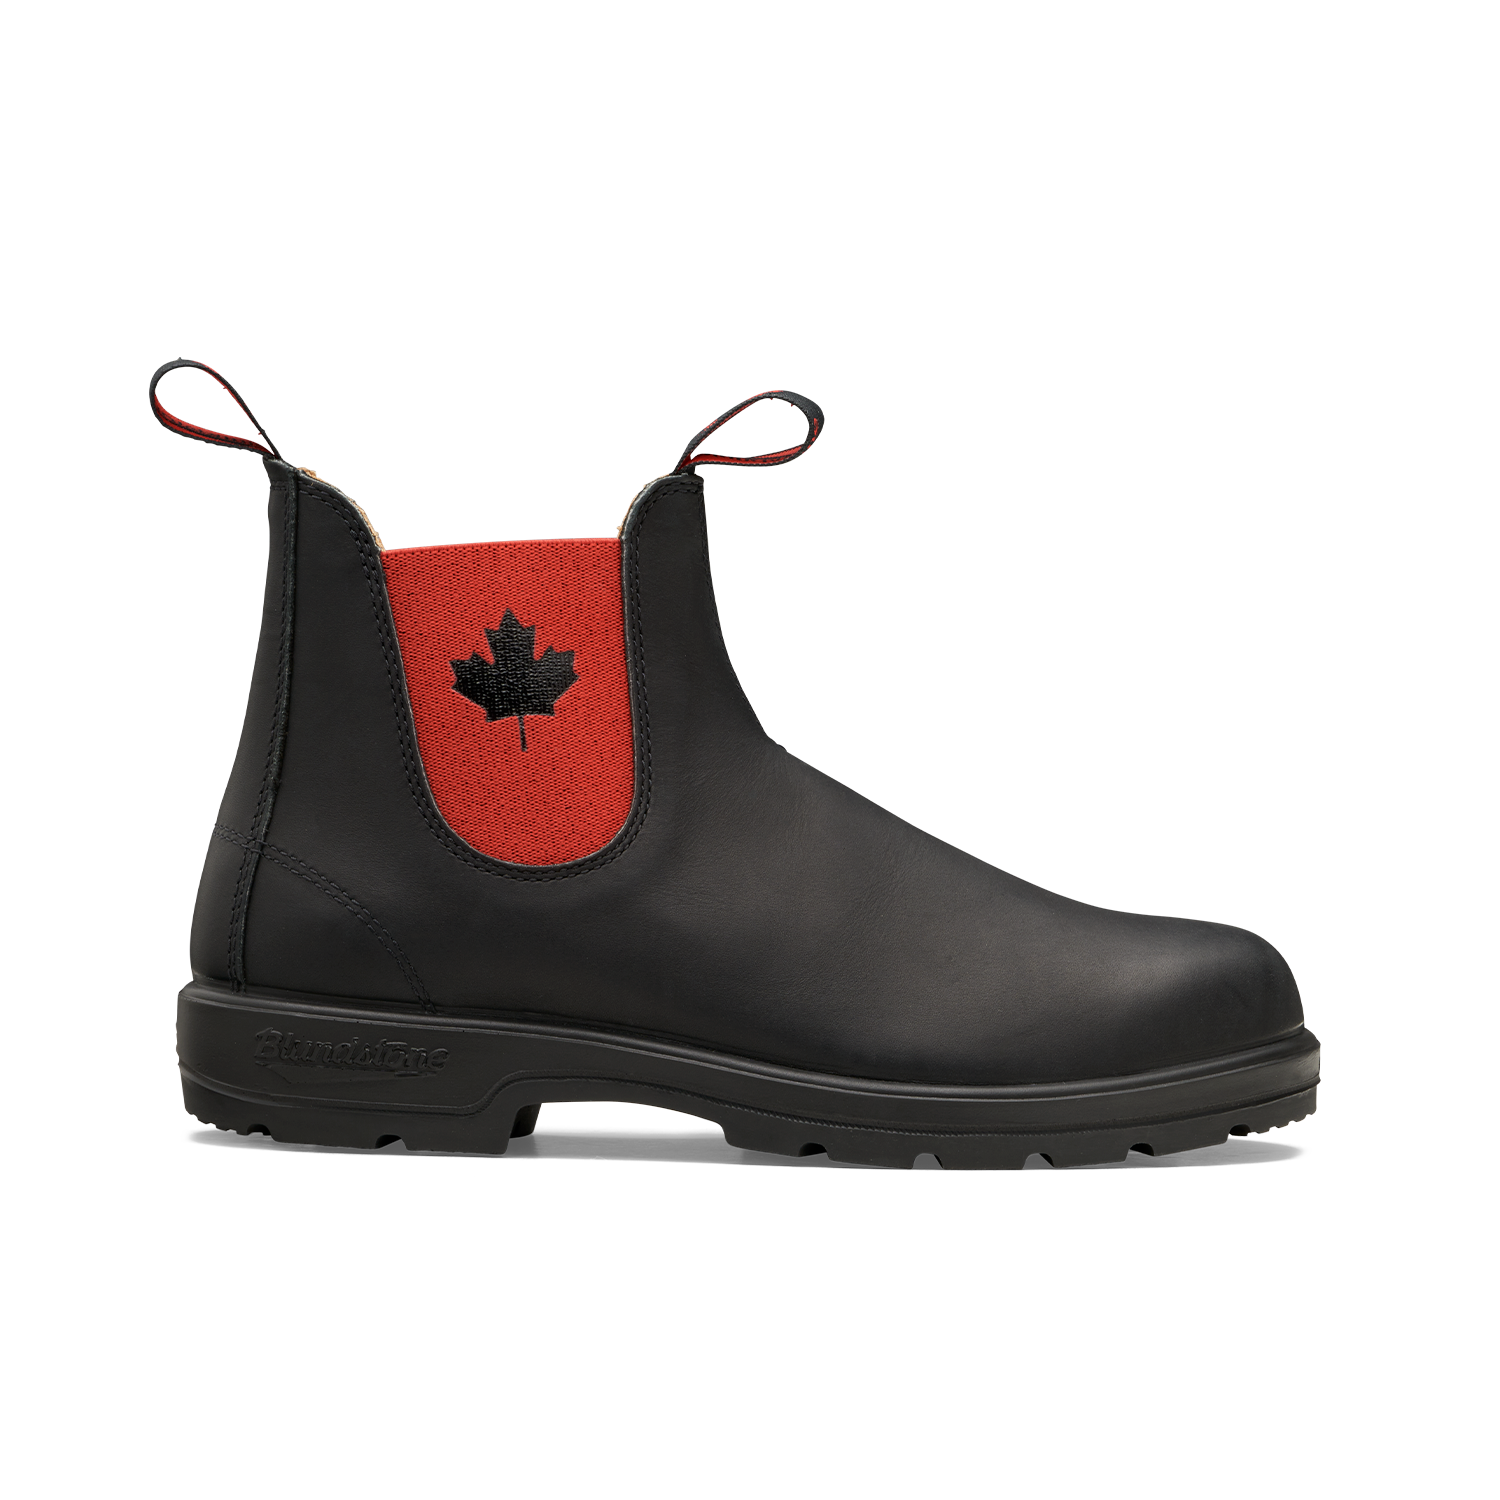 Blundstone 1474 Classics Eh! Boot Black with Red Elastic